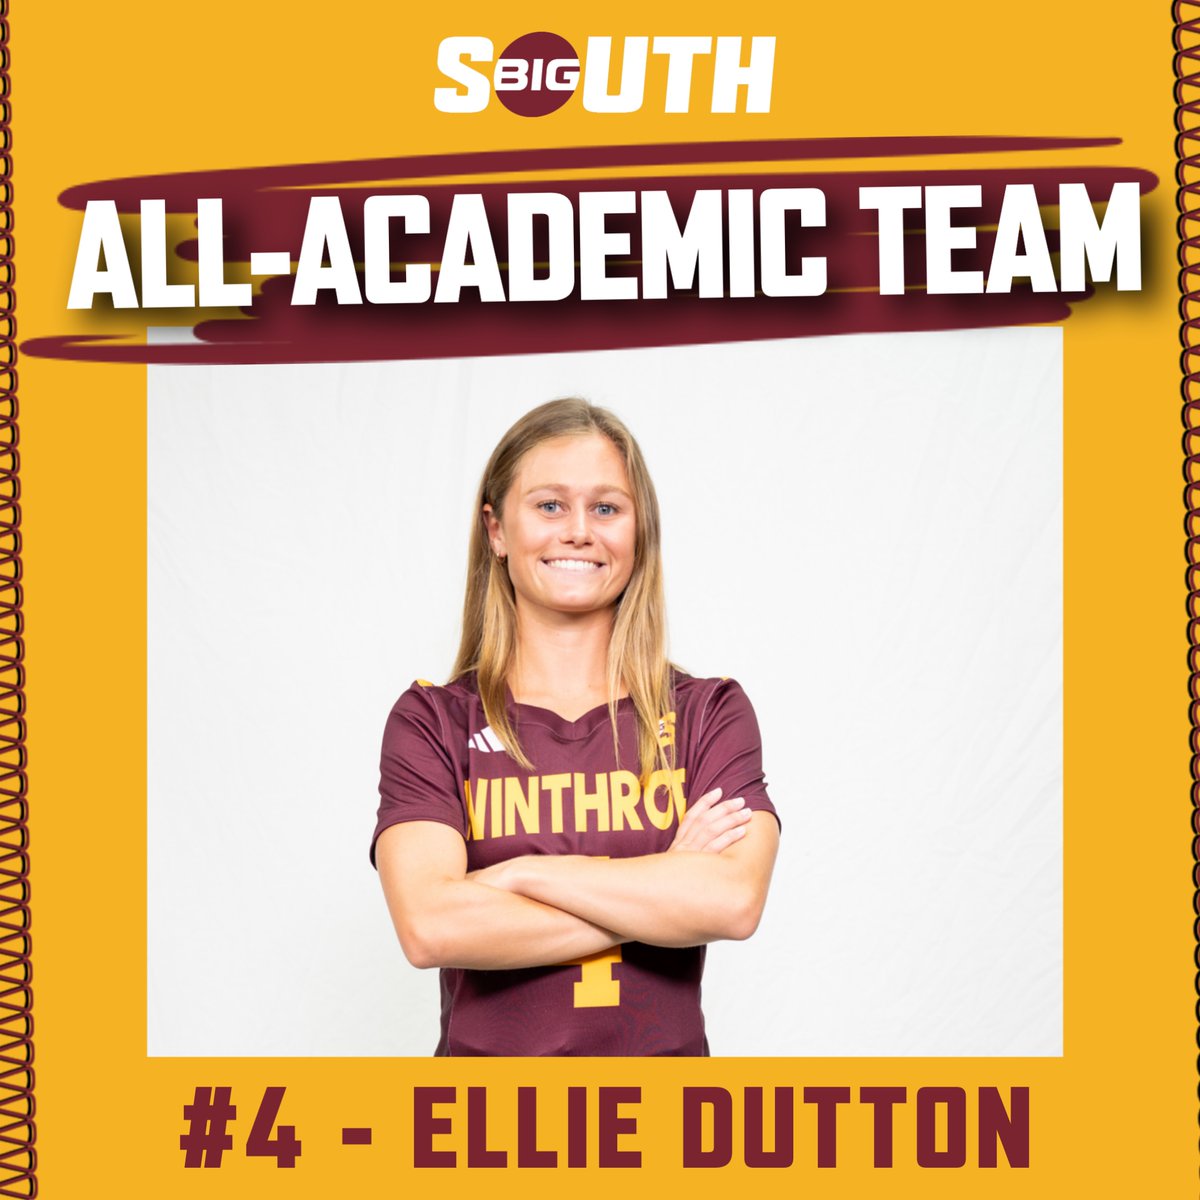 𝐎𝐔𝐑 𝐒𝐇𝐀𝐑𝐏 𝐒𝐄𝐍𝐈𝐎𝐑 💛🦅 . Congratulations to senior attacker, #4, Ellie Dutton on her Big South All-Academic Team Award! . #GoEagles | #ROCKtheHILL